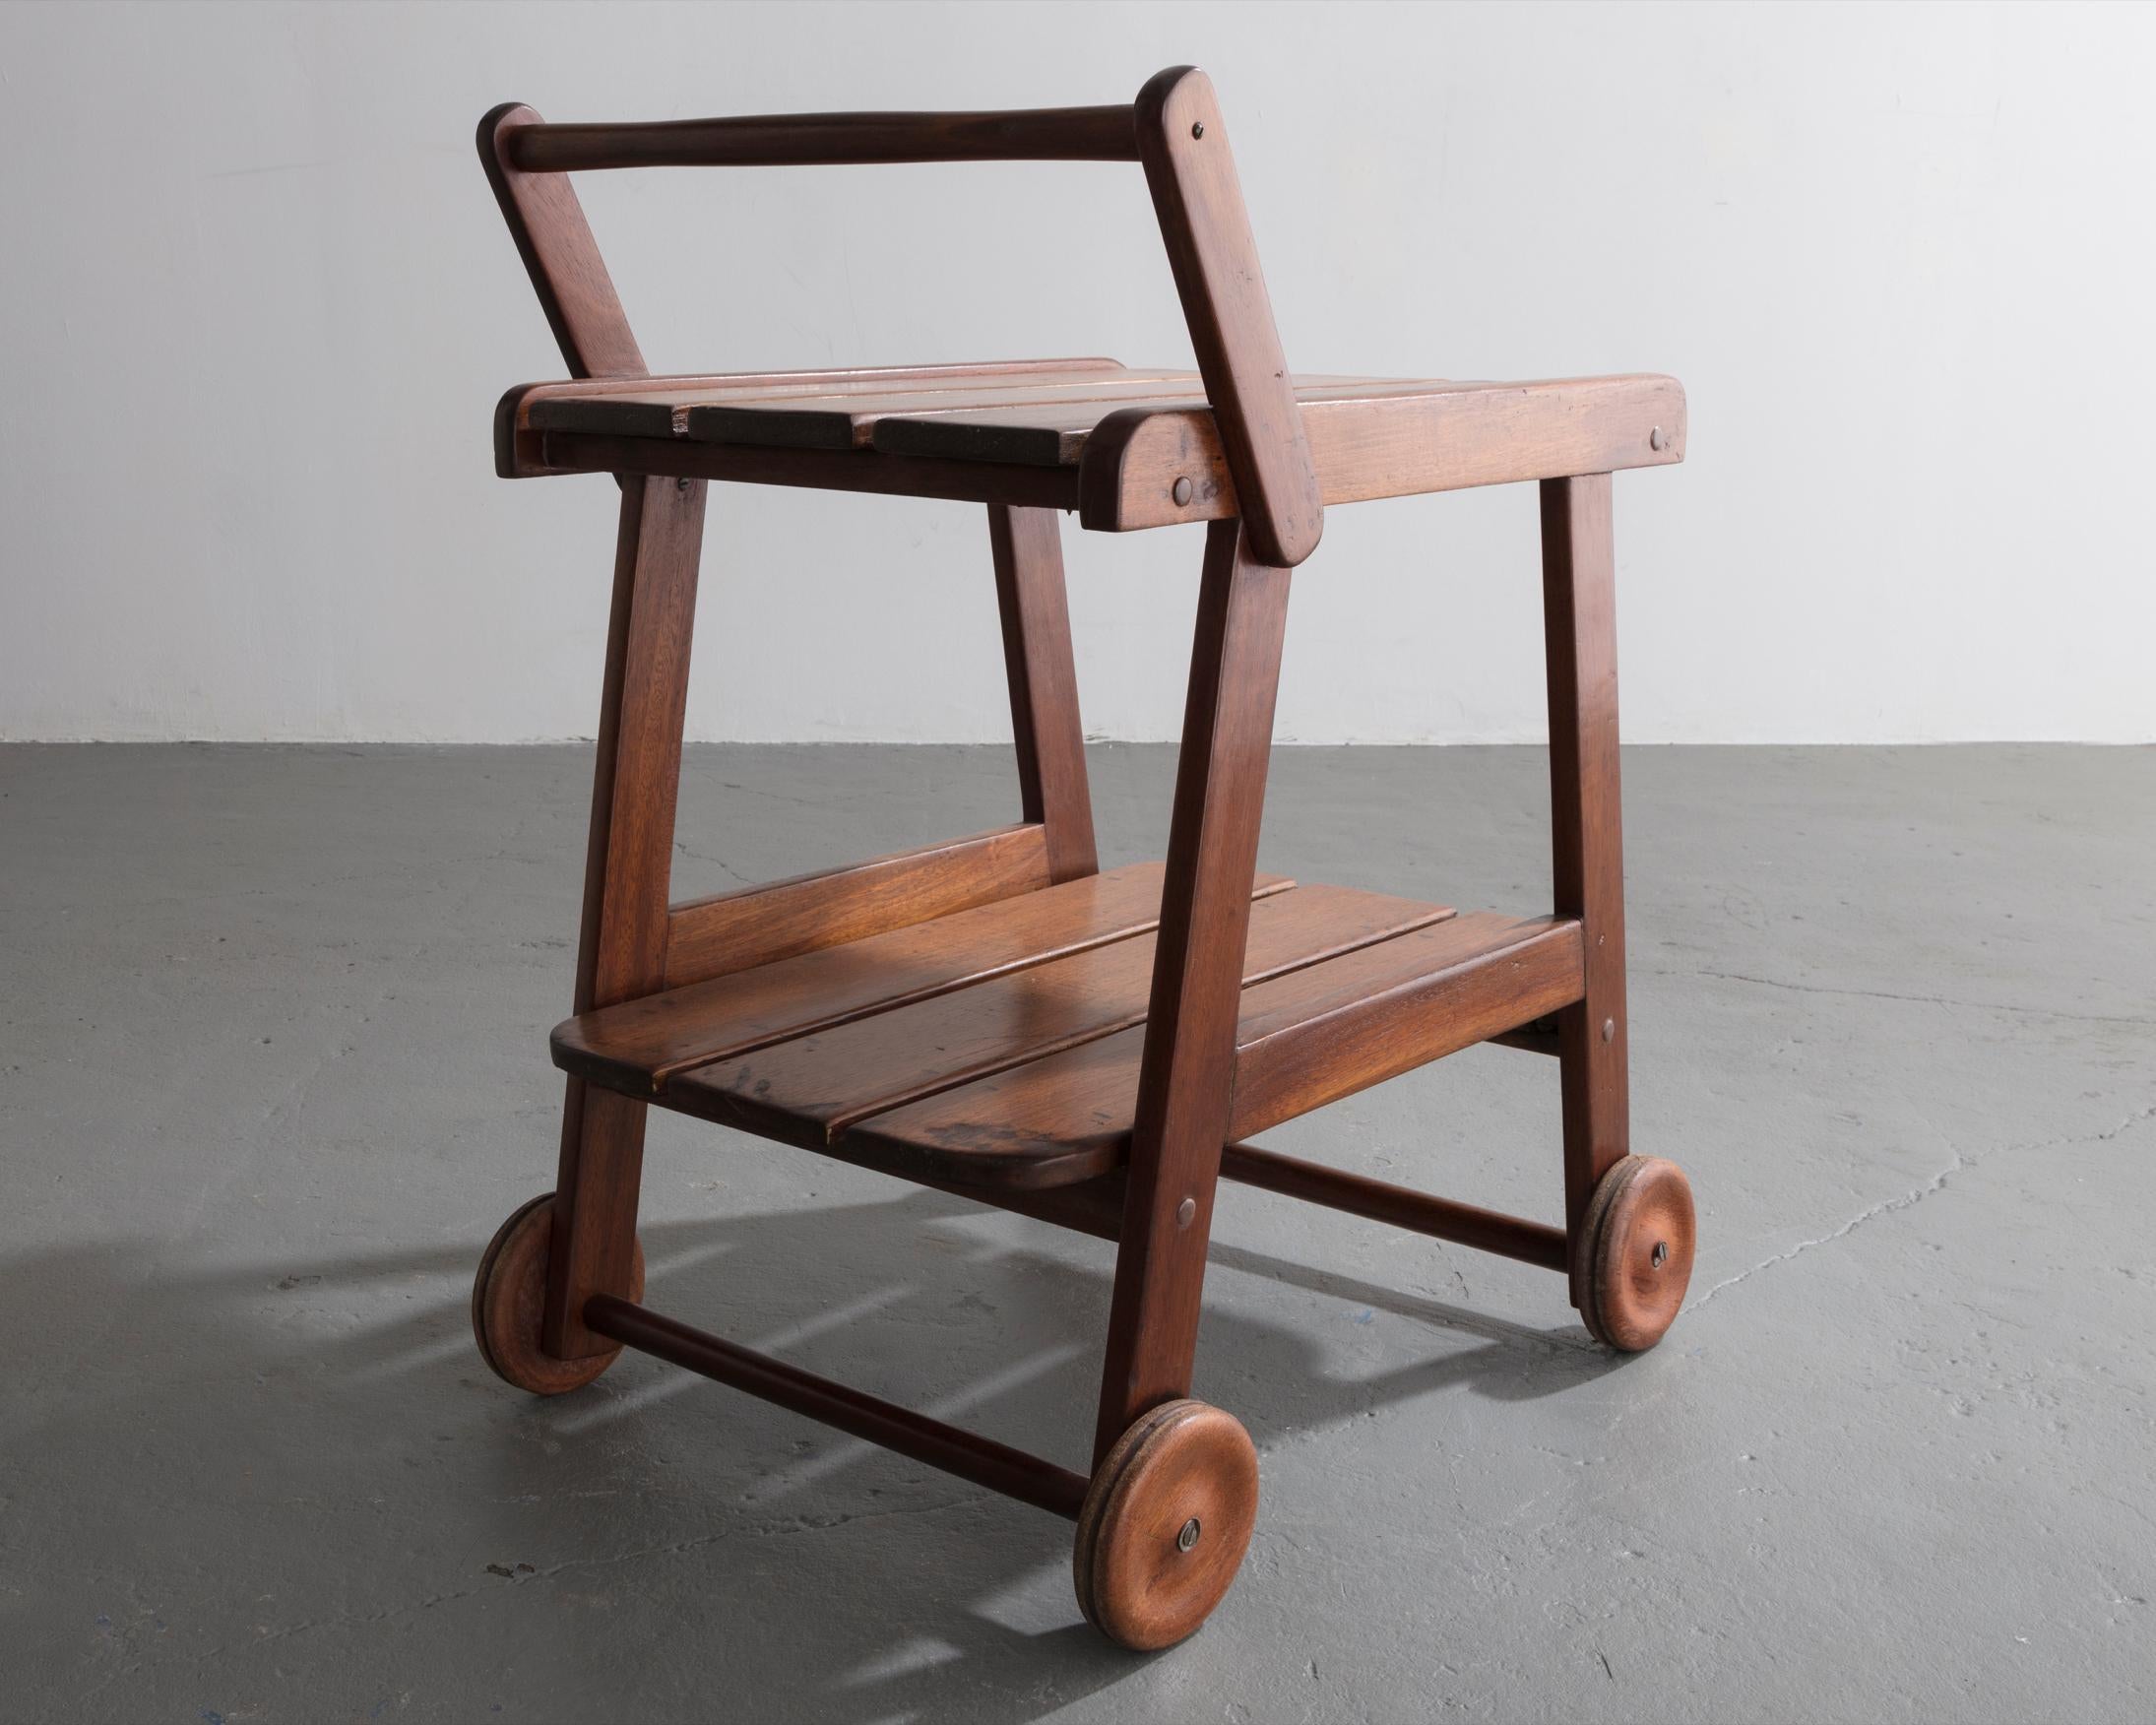 Tajá tea cart in solid rose wood designed by Sergio Rodrigues, Brazil, circa 1978.